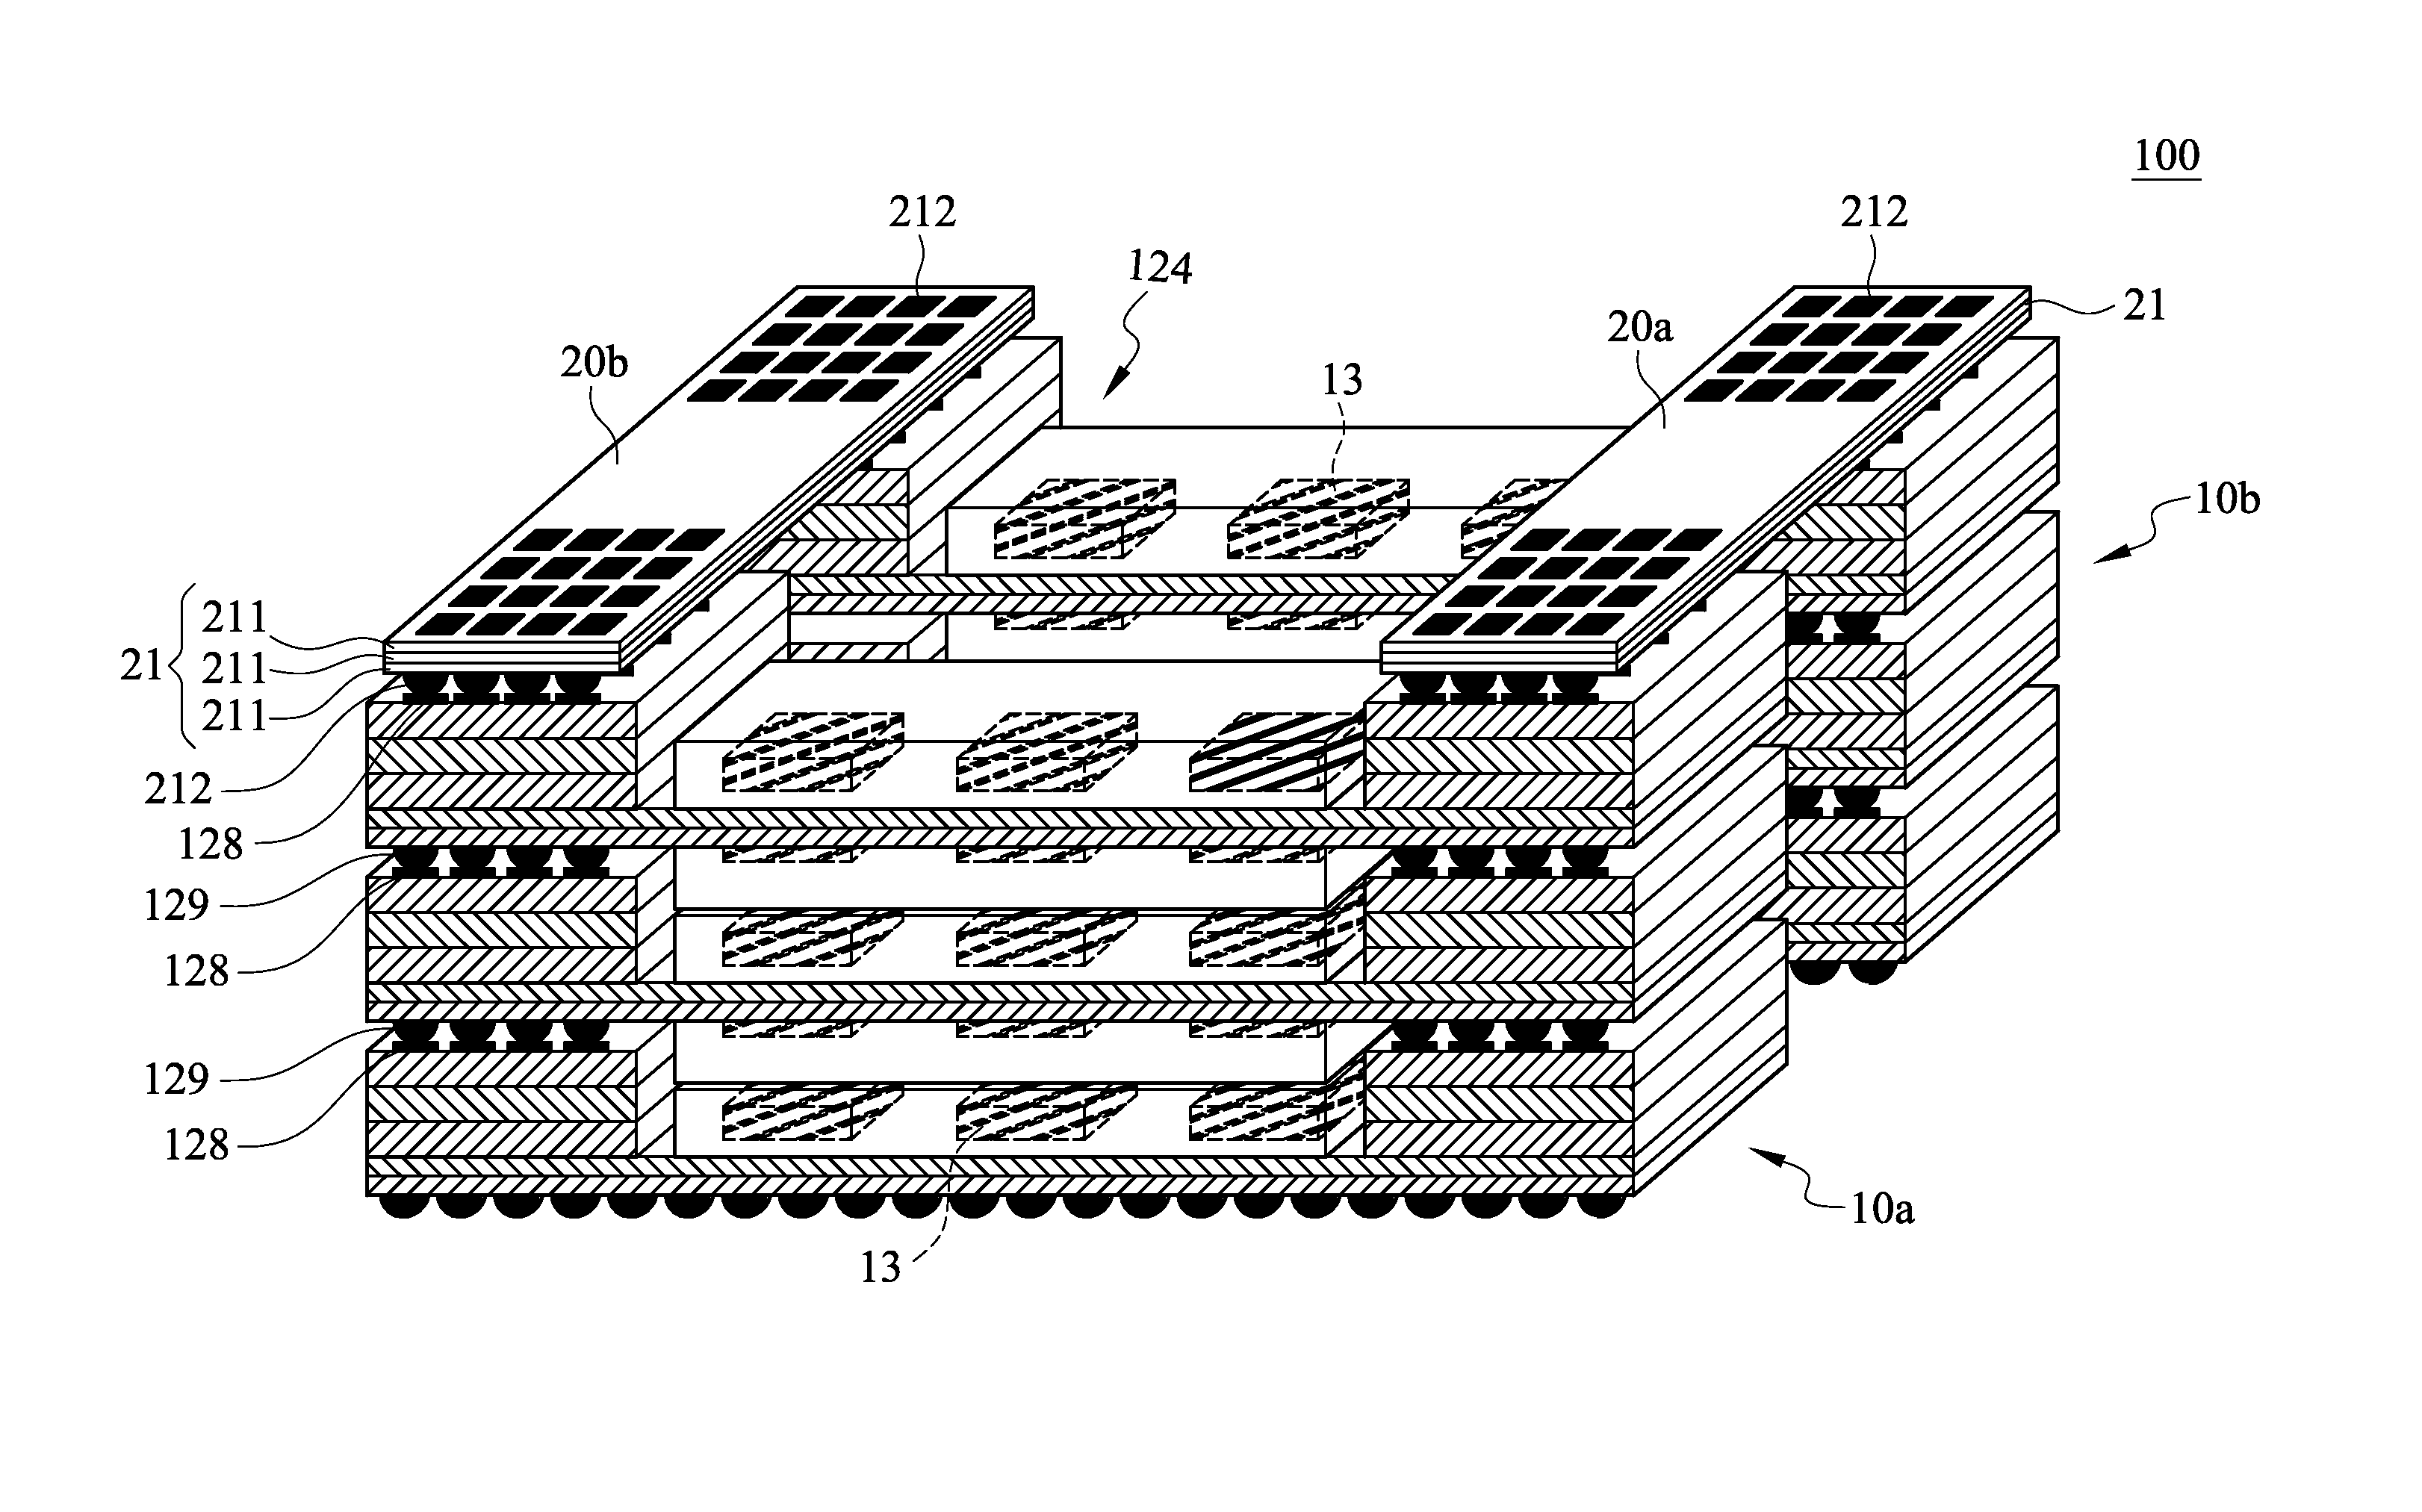 Three-dimensional SoC structure formed by stacking multiple chip modules